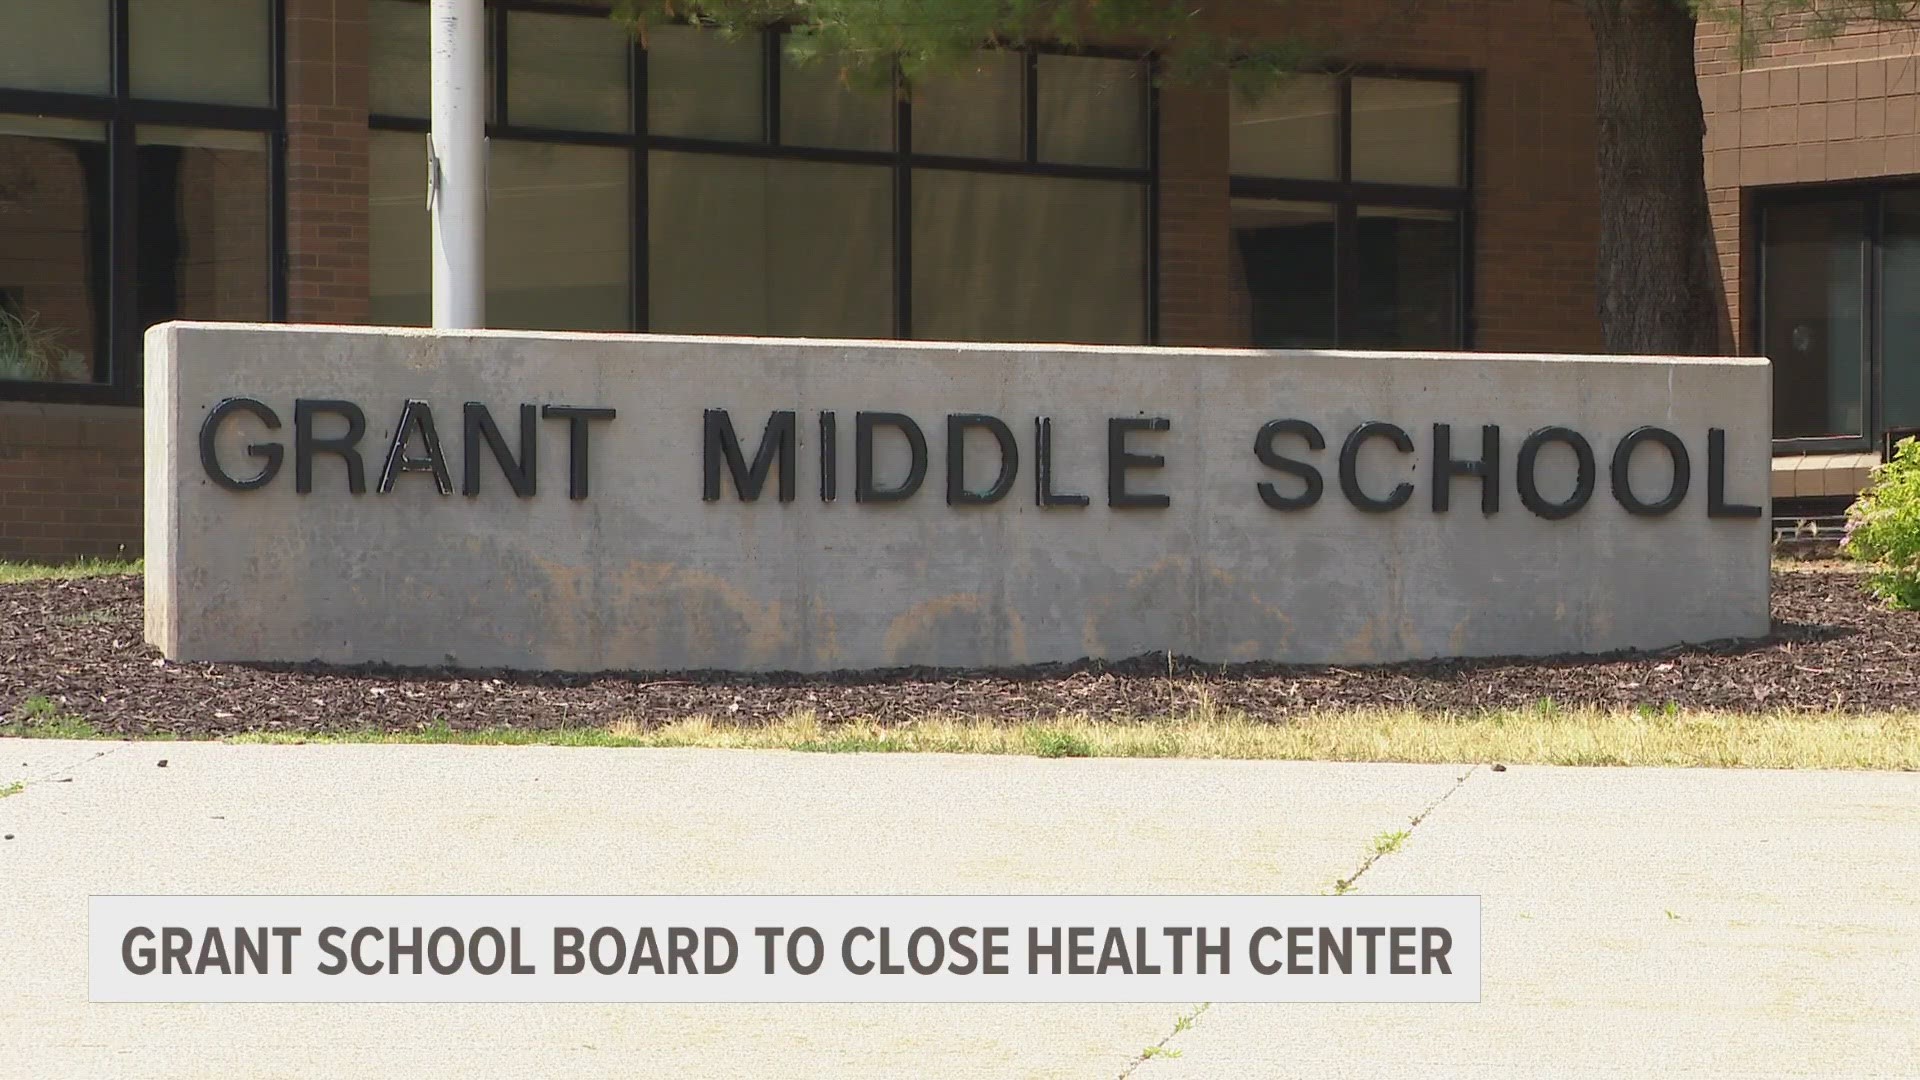 Once the contract expires, Family Health Care will no longer operate the Children and Adolescent Health Center in Grant Middle School.